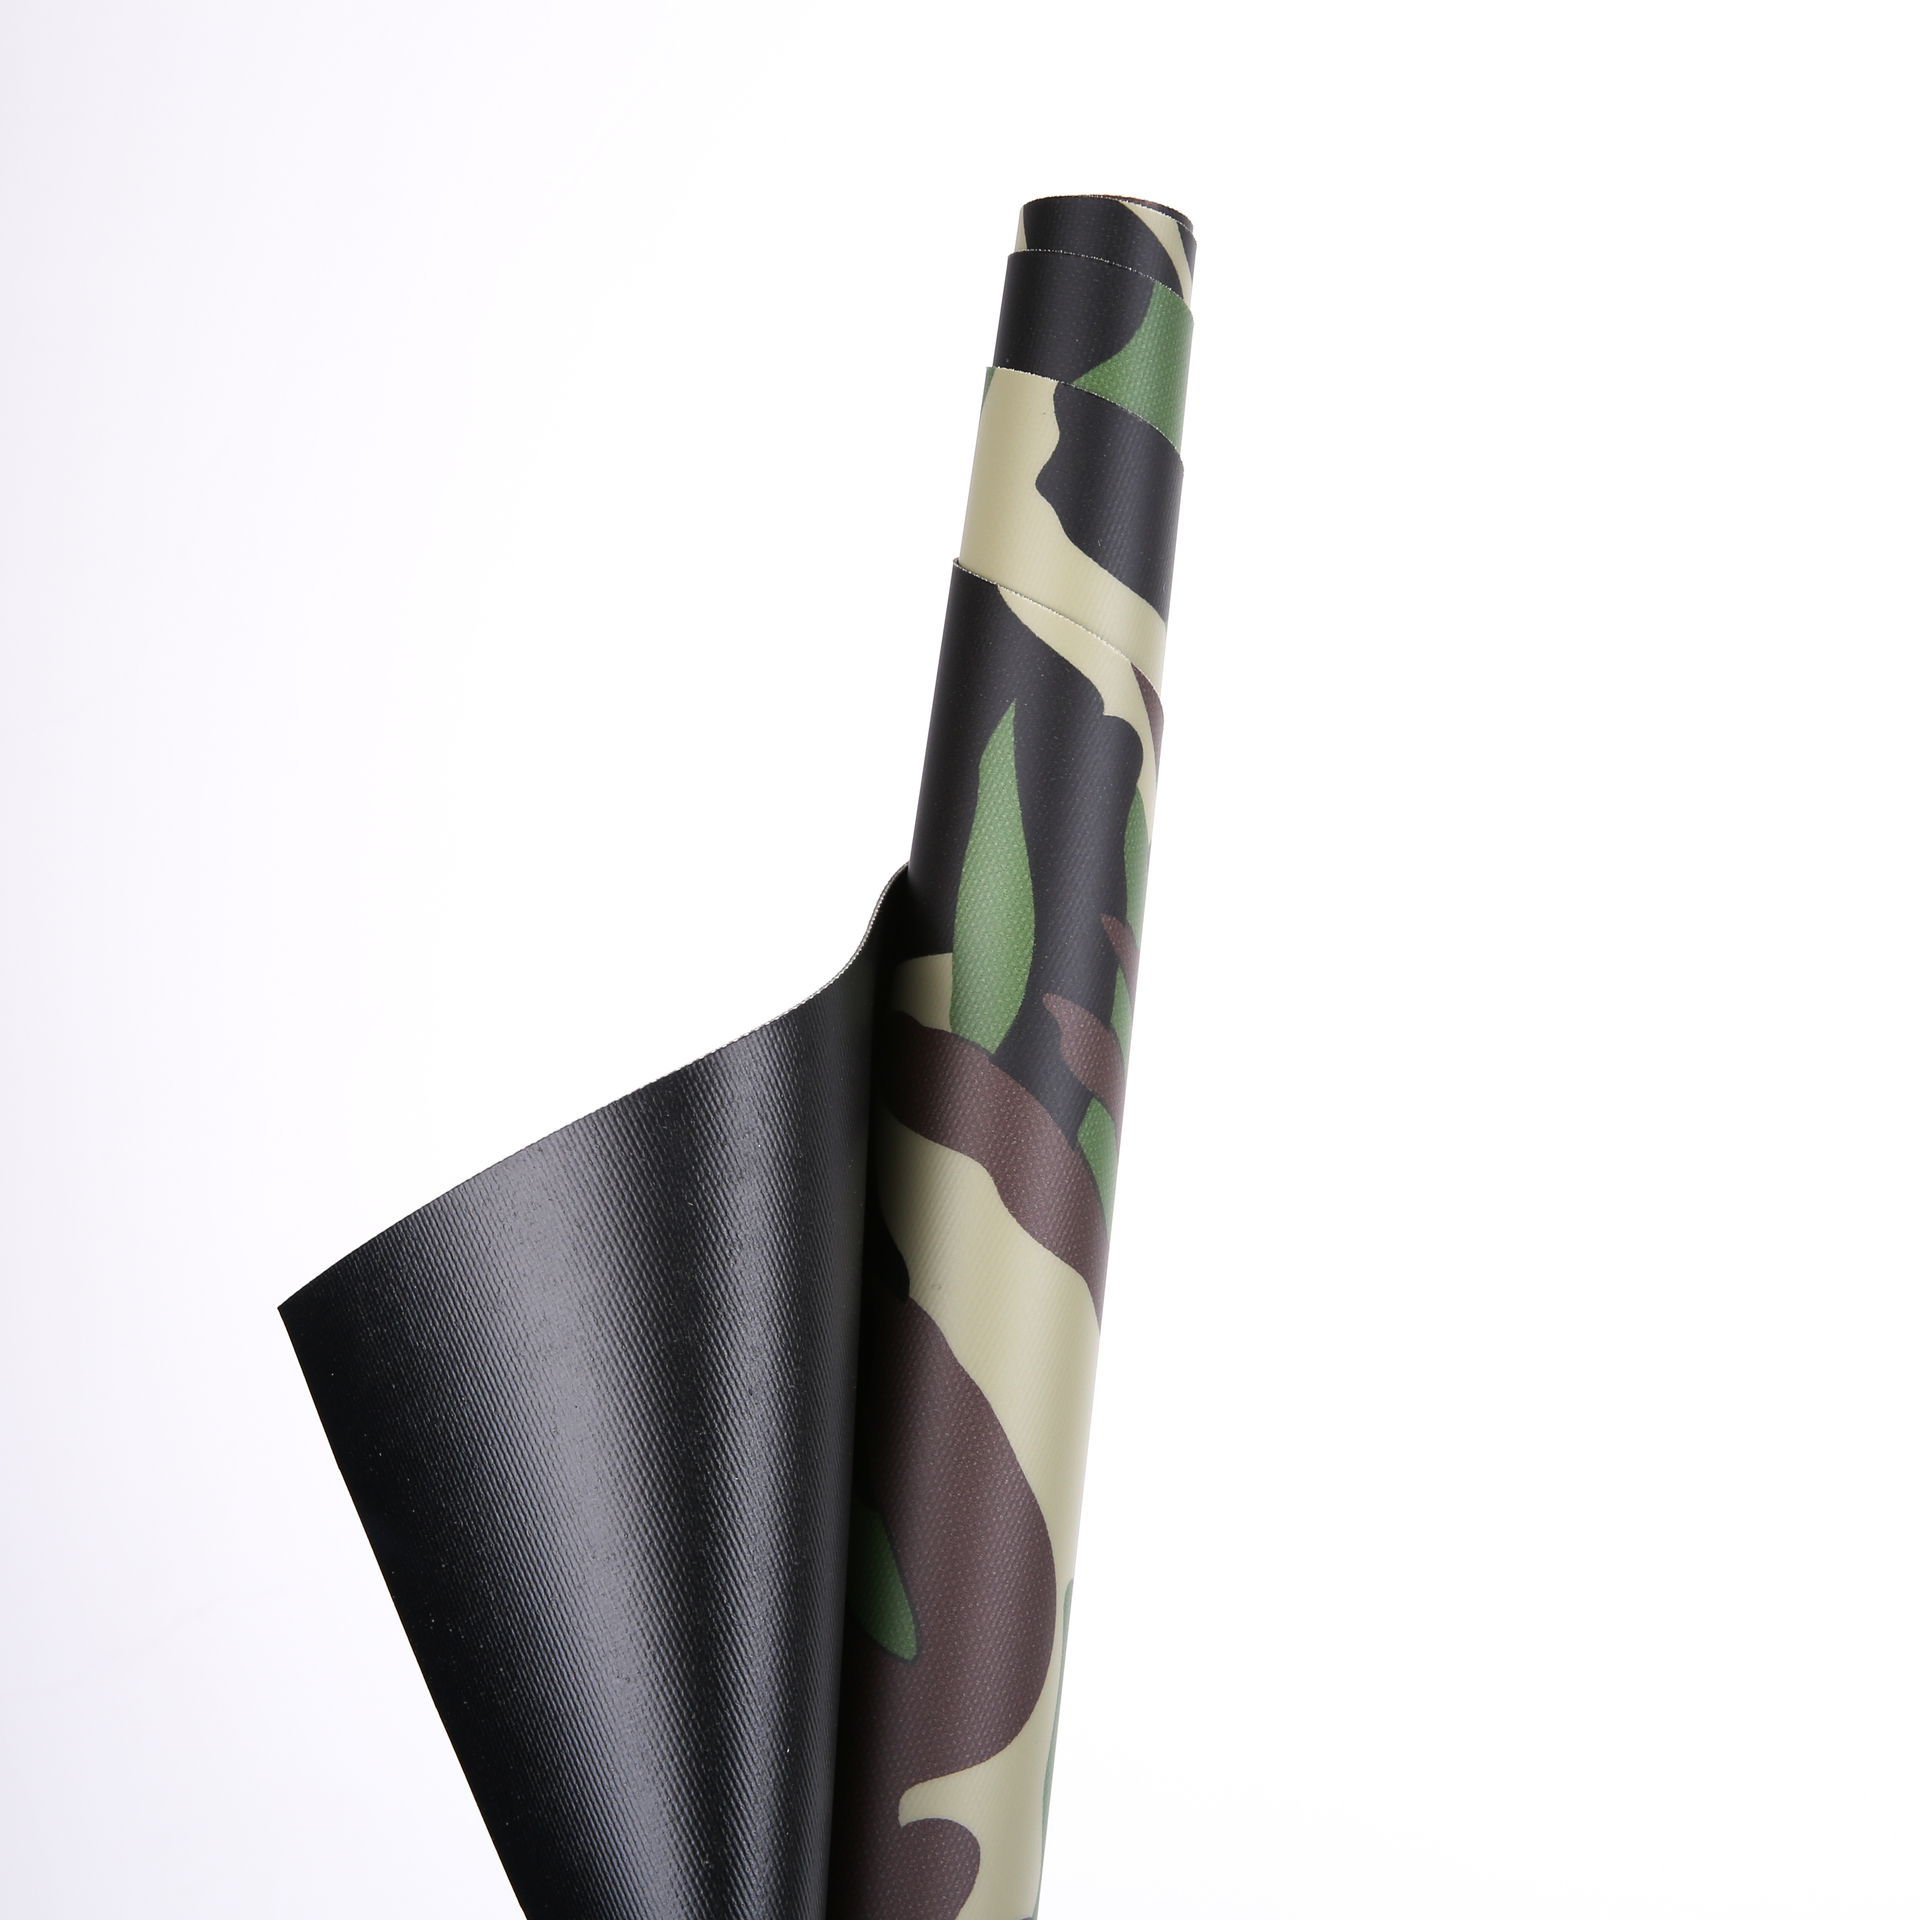 Camouflage yacht cloth